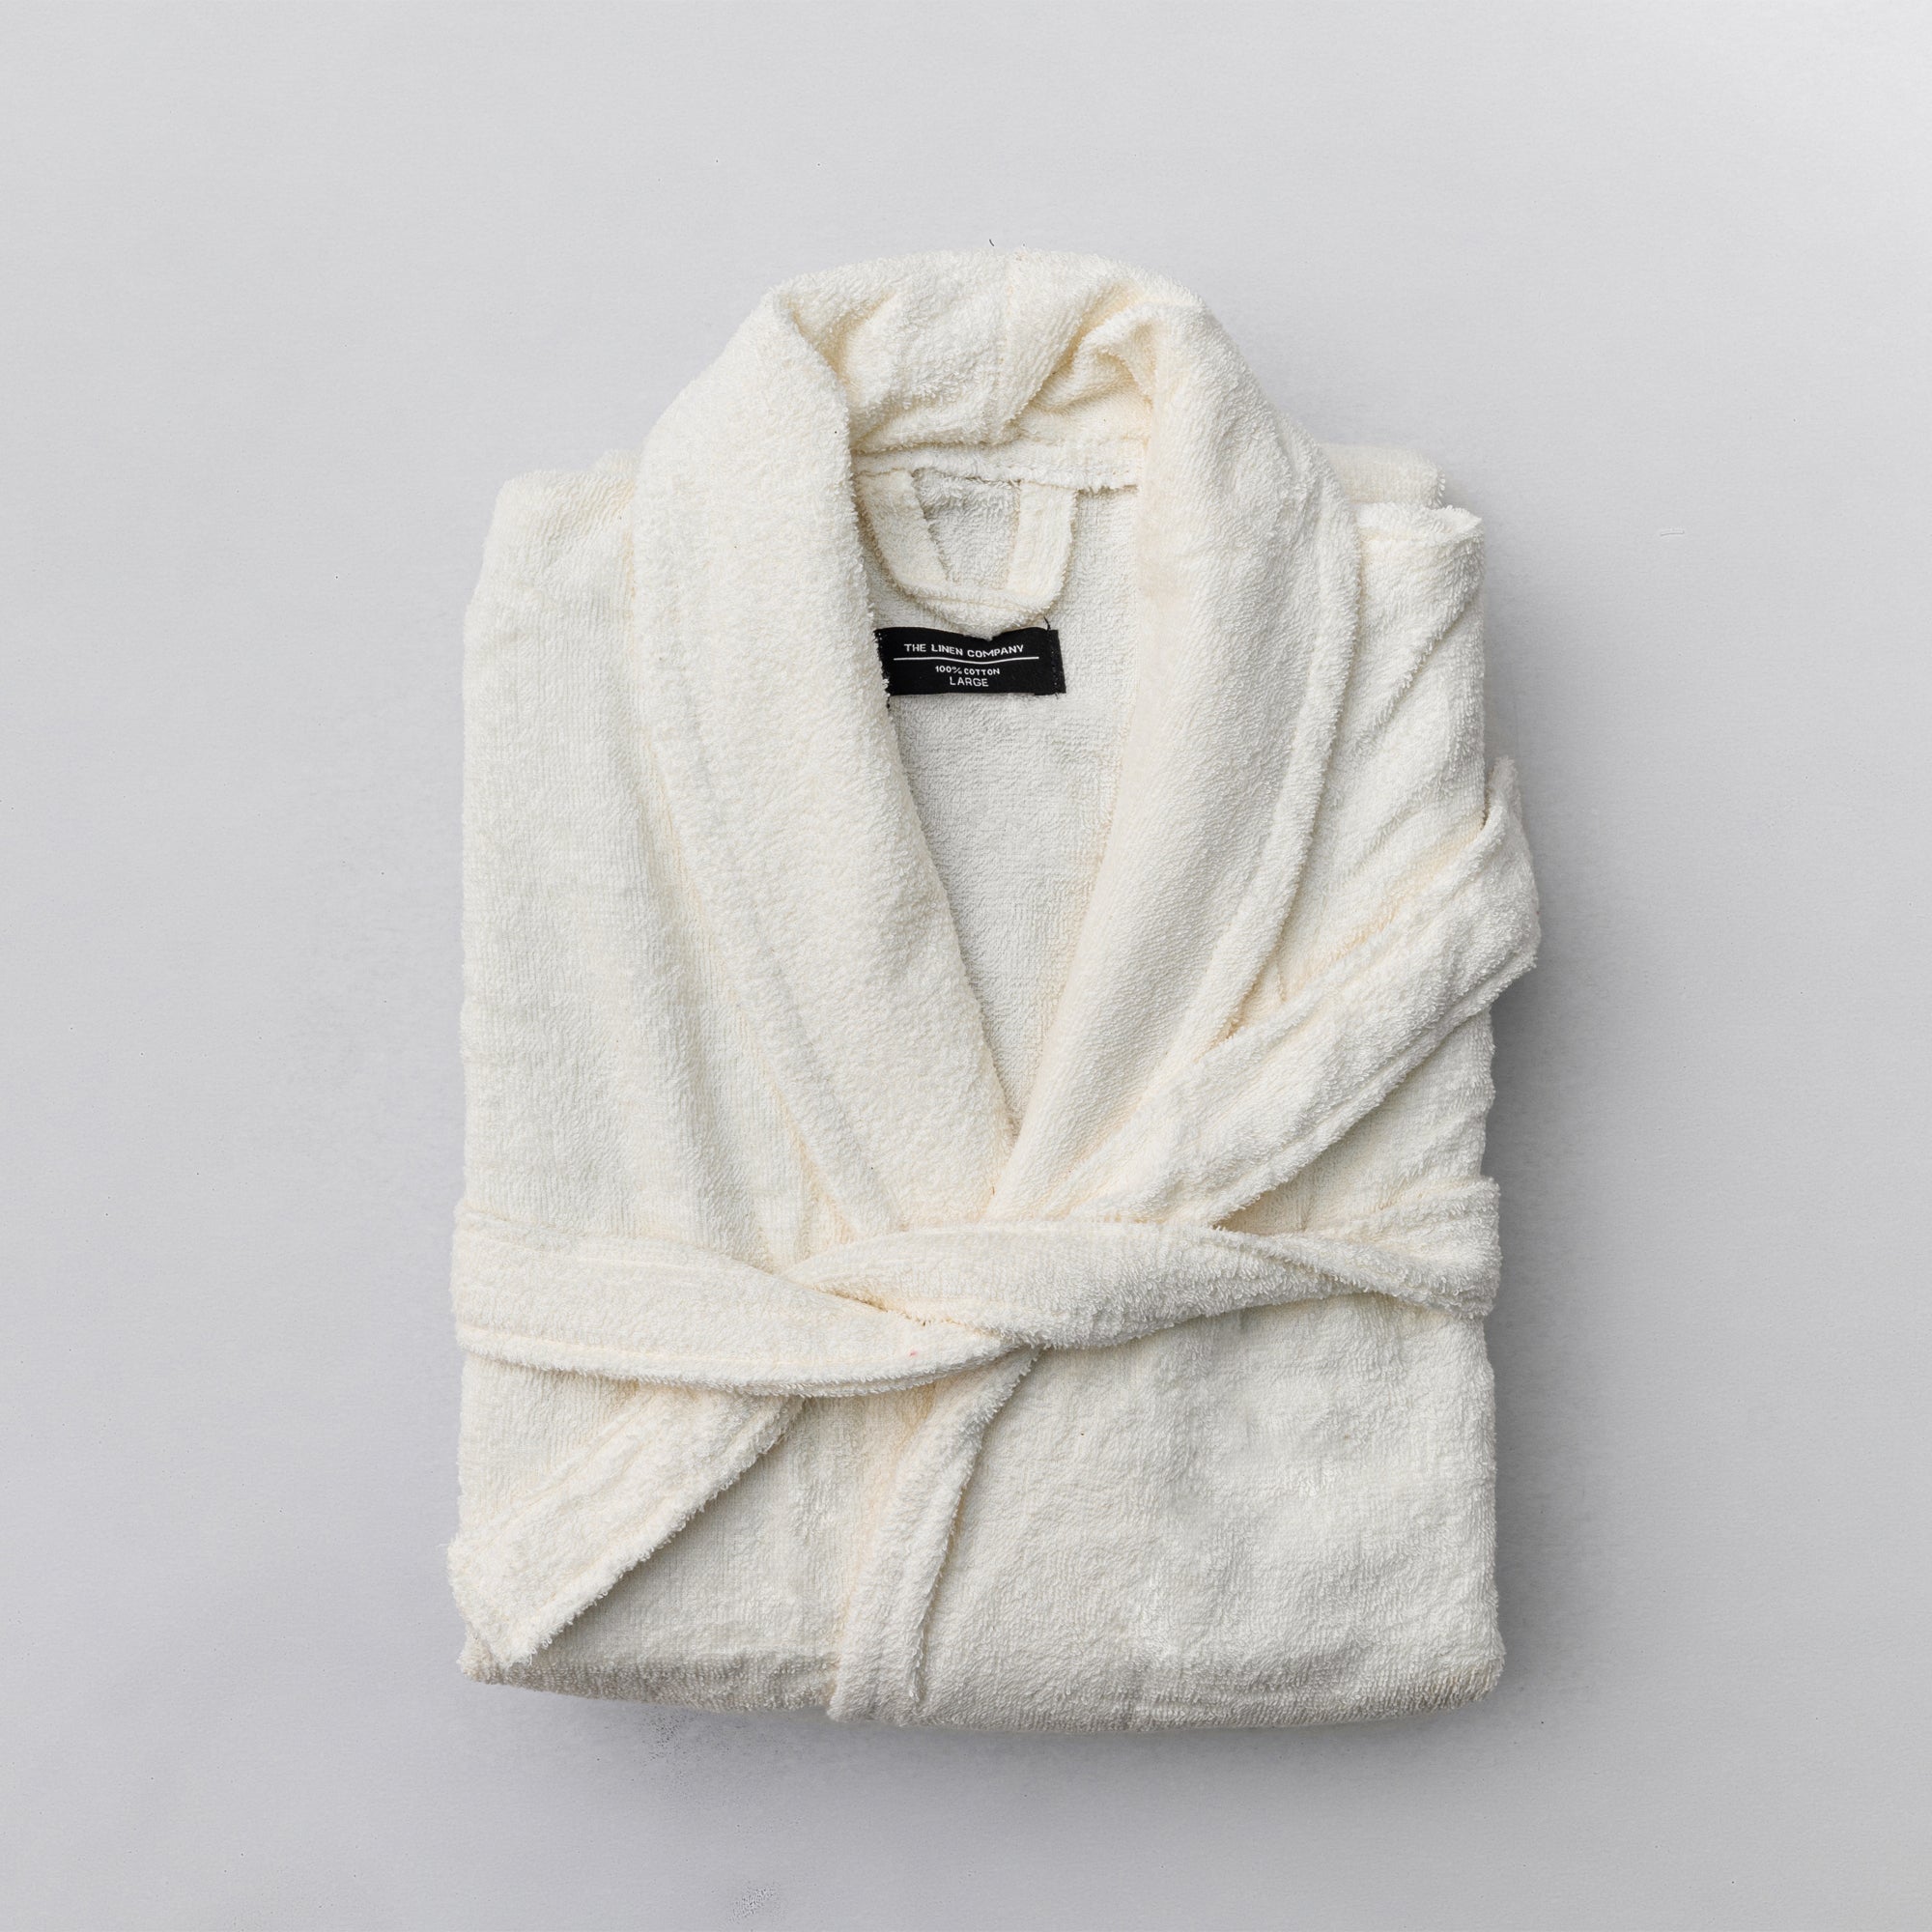 The Linen Company Accessories Large Ivory Collared Bathrobe Cover